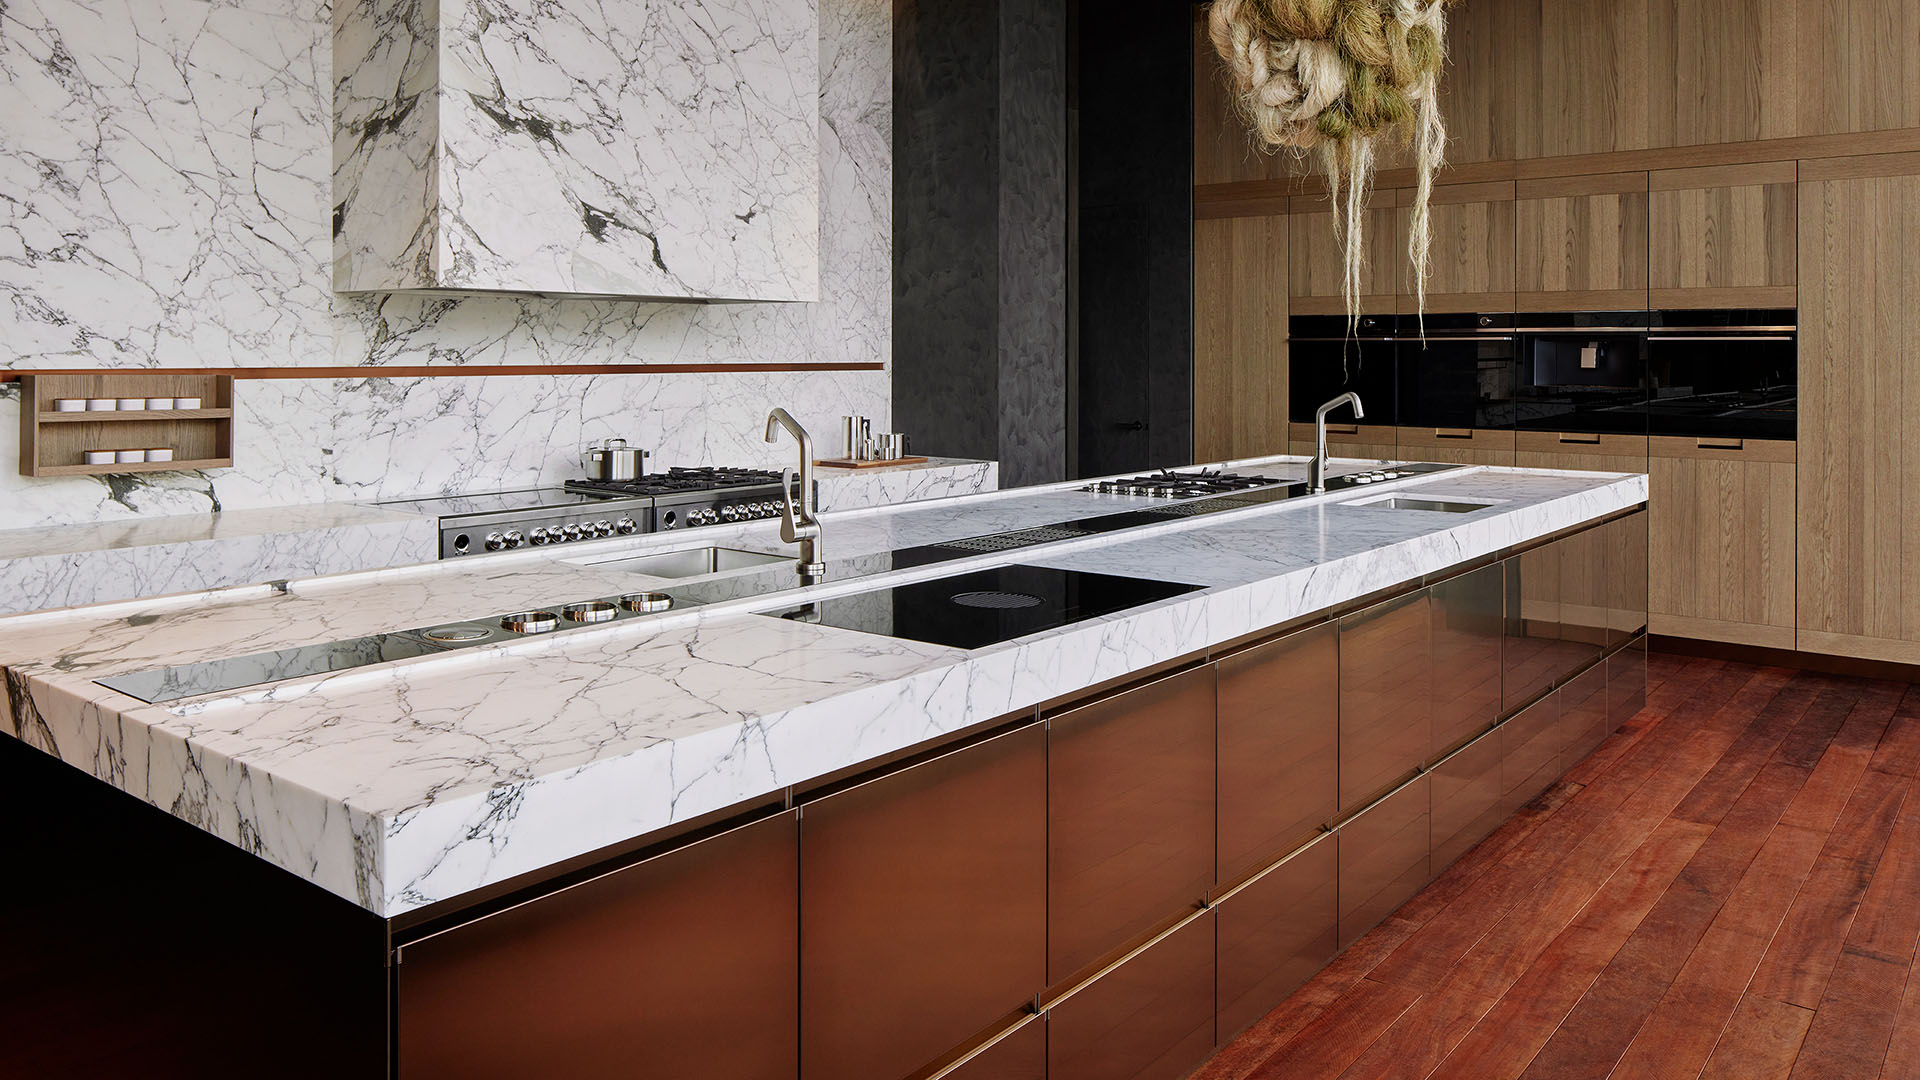 The Arclinea Contemporary Kitchen